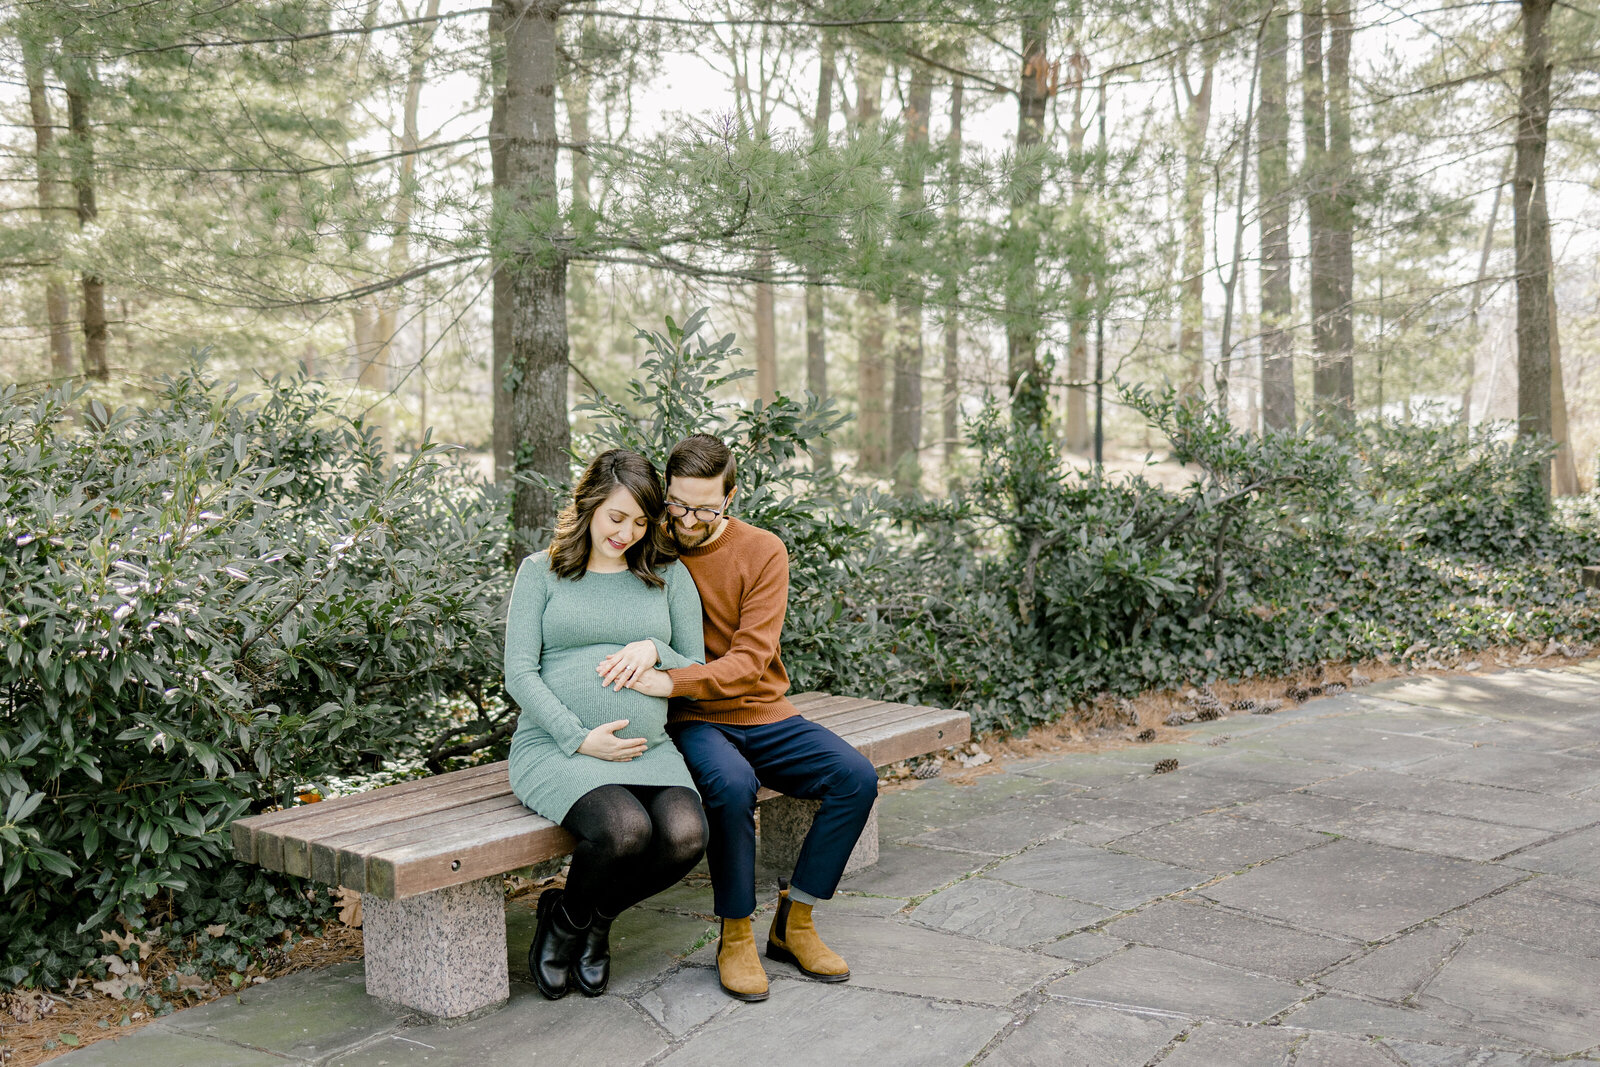 Couple sitting on bench looking at baby bump